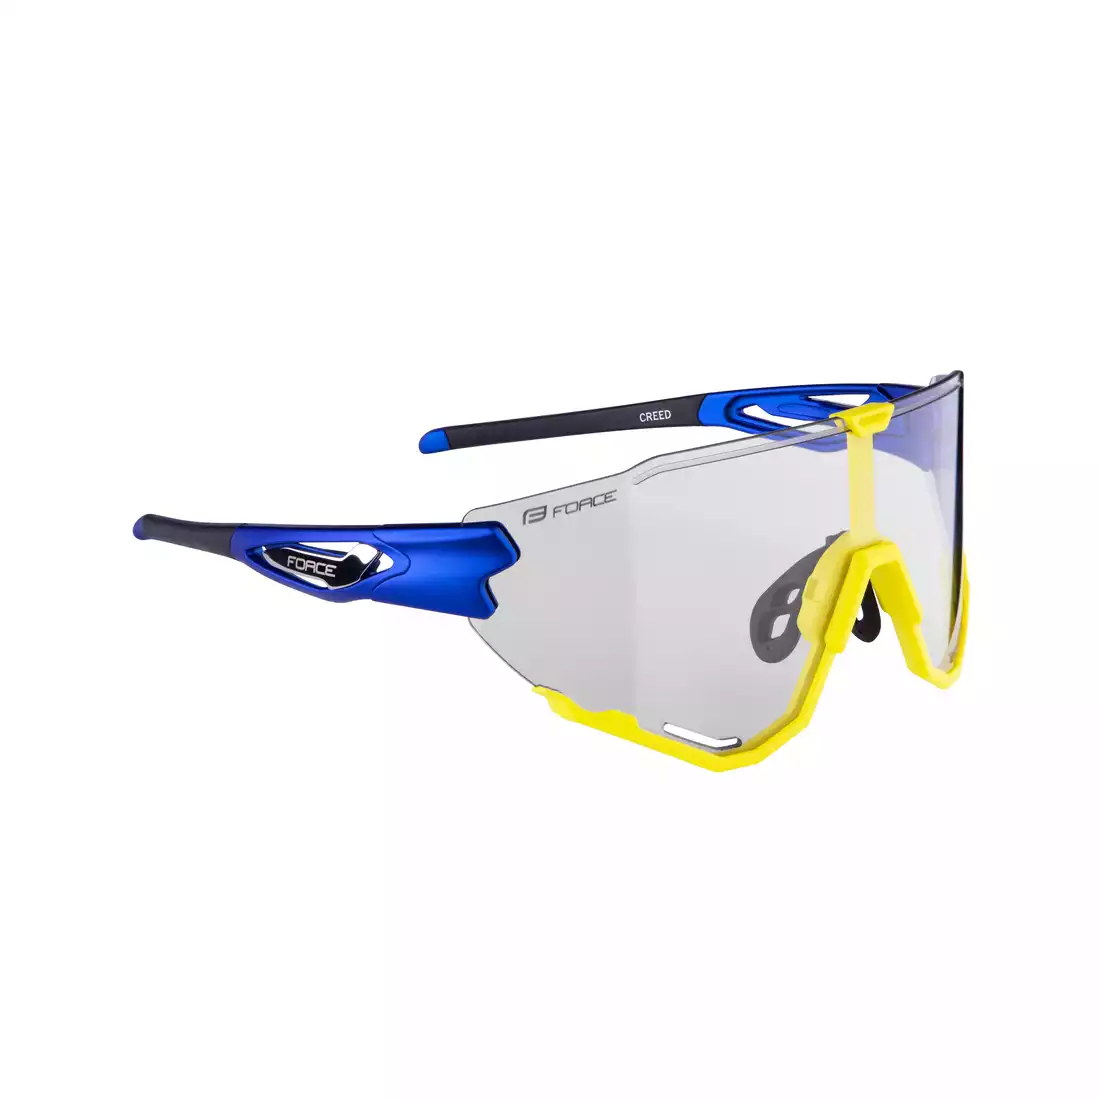 FORCE CREED Photochromic sports glasses, blue and yellow